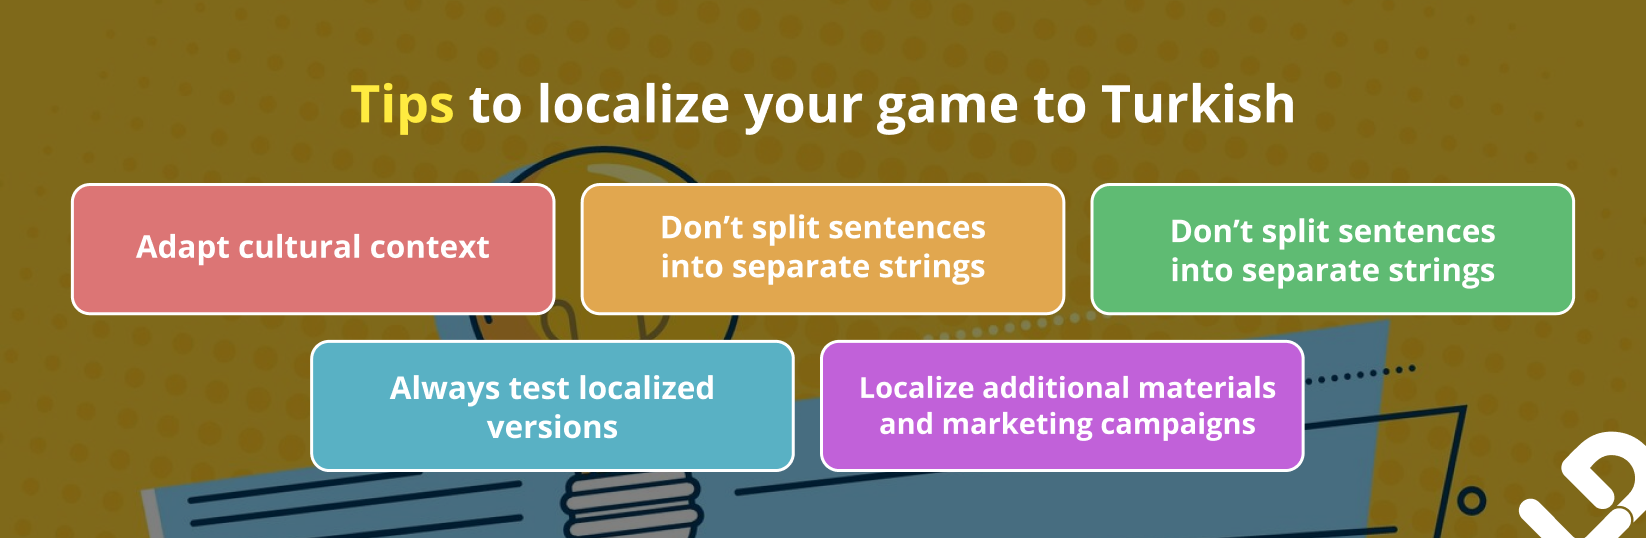 tips-to-localize-your-game-to-Turkish